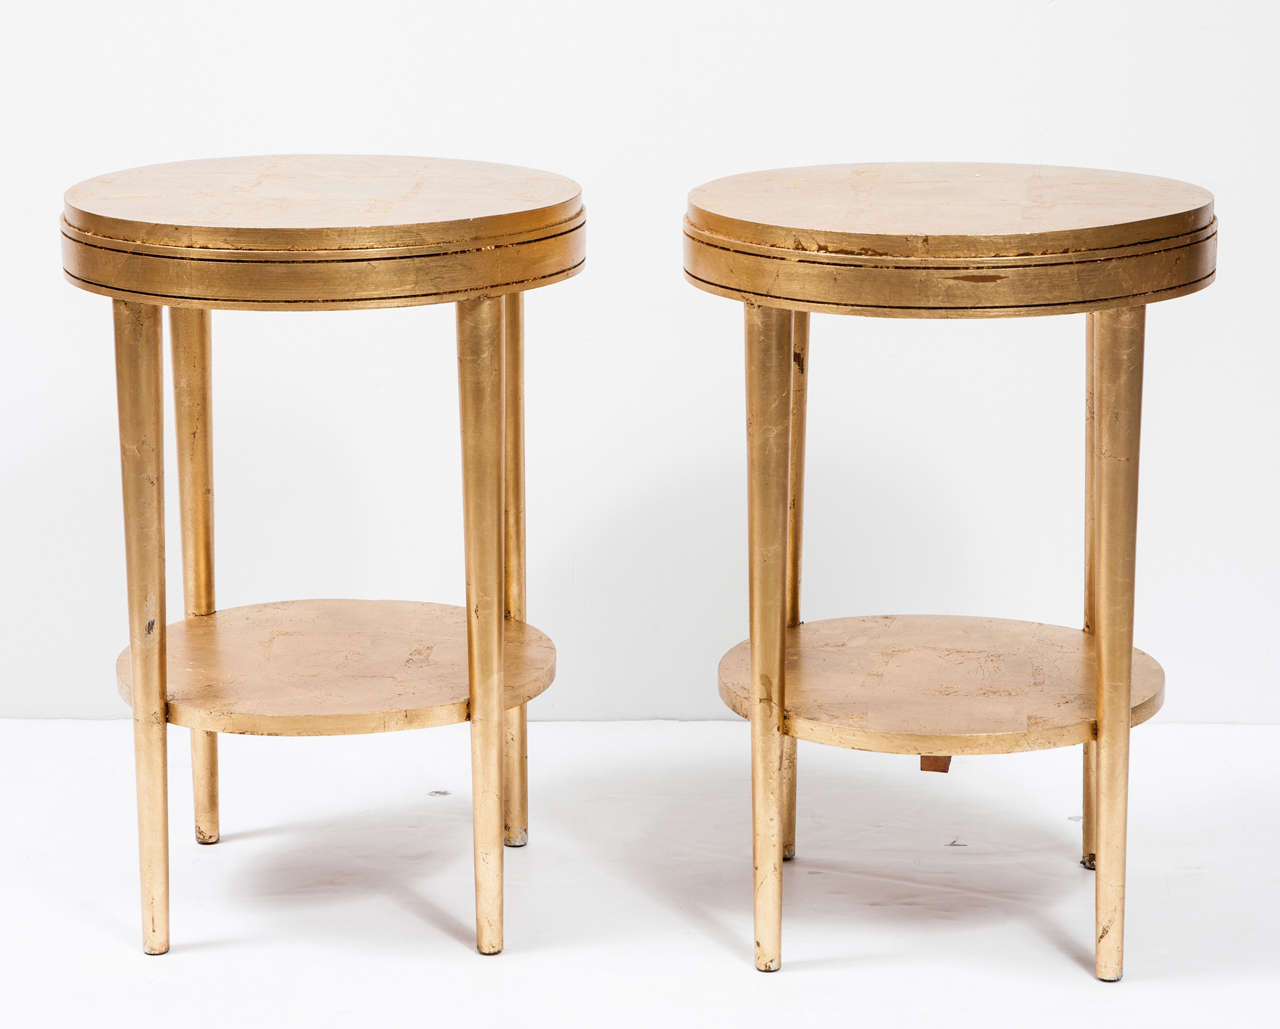 Neoclassical Pair of Giltwood Side Tables